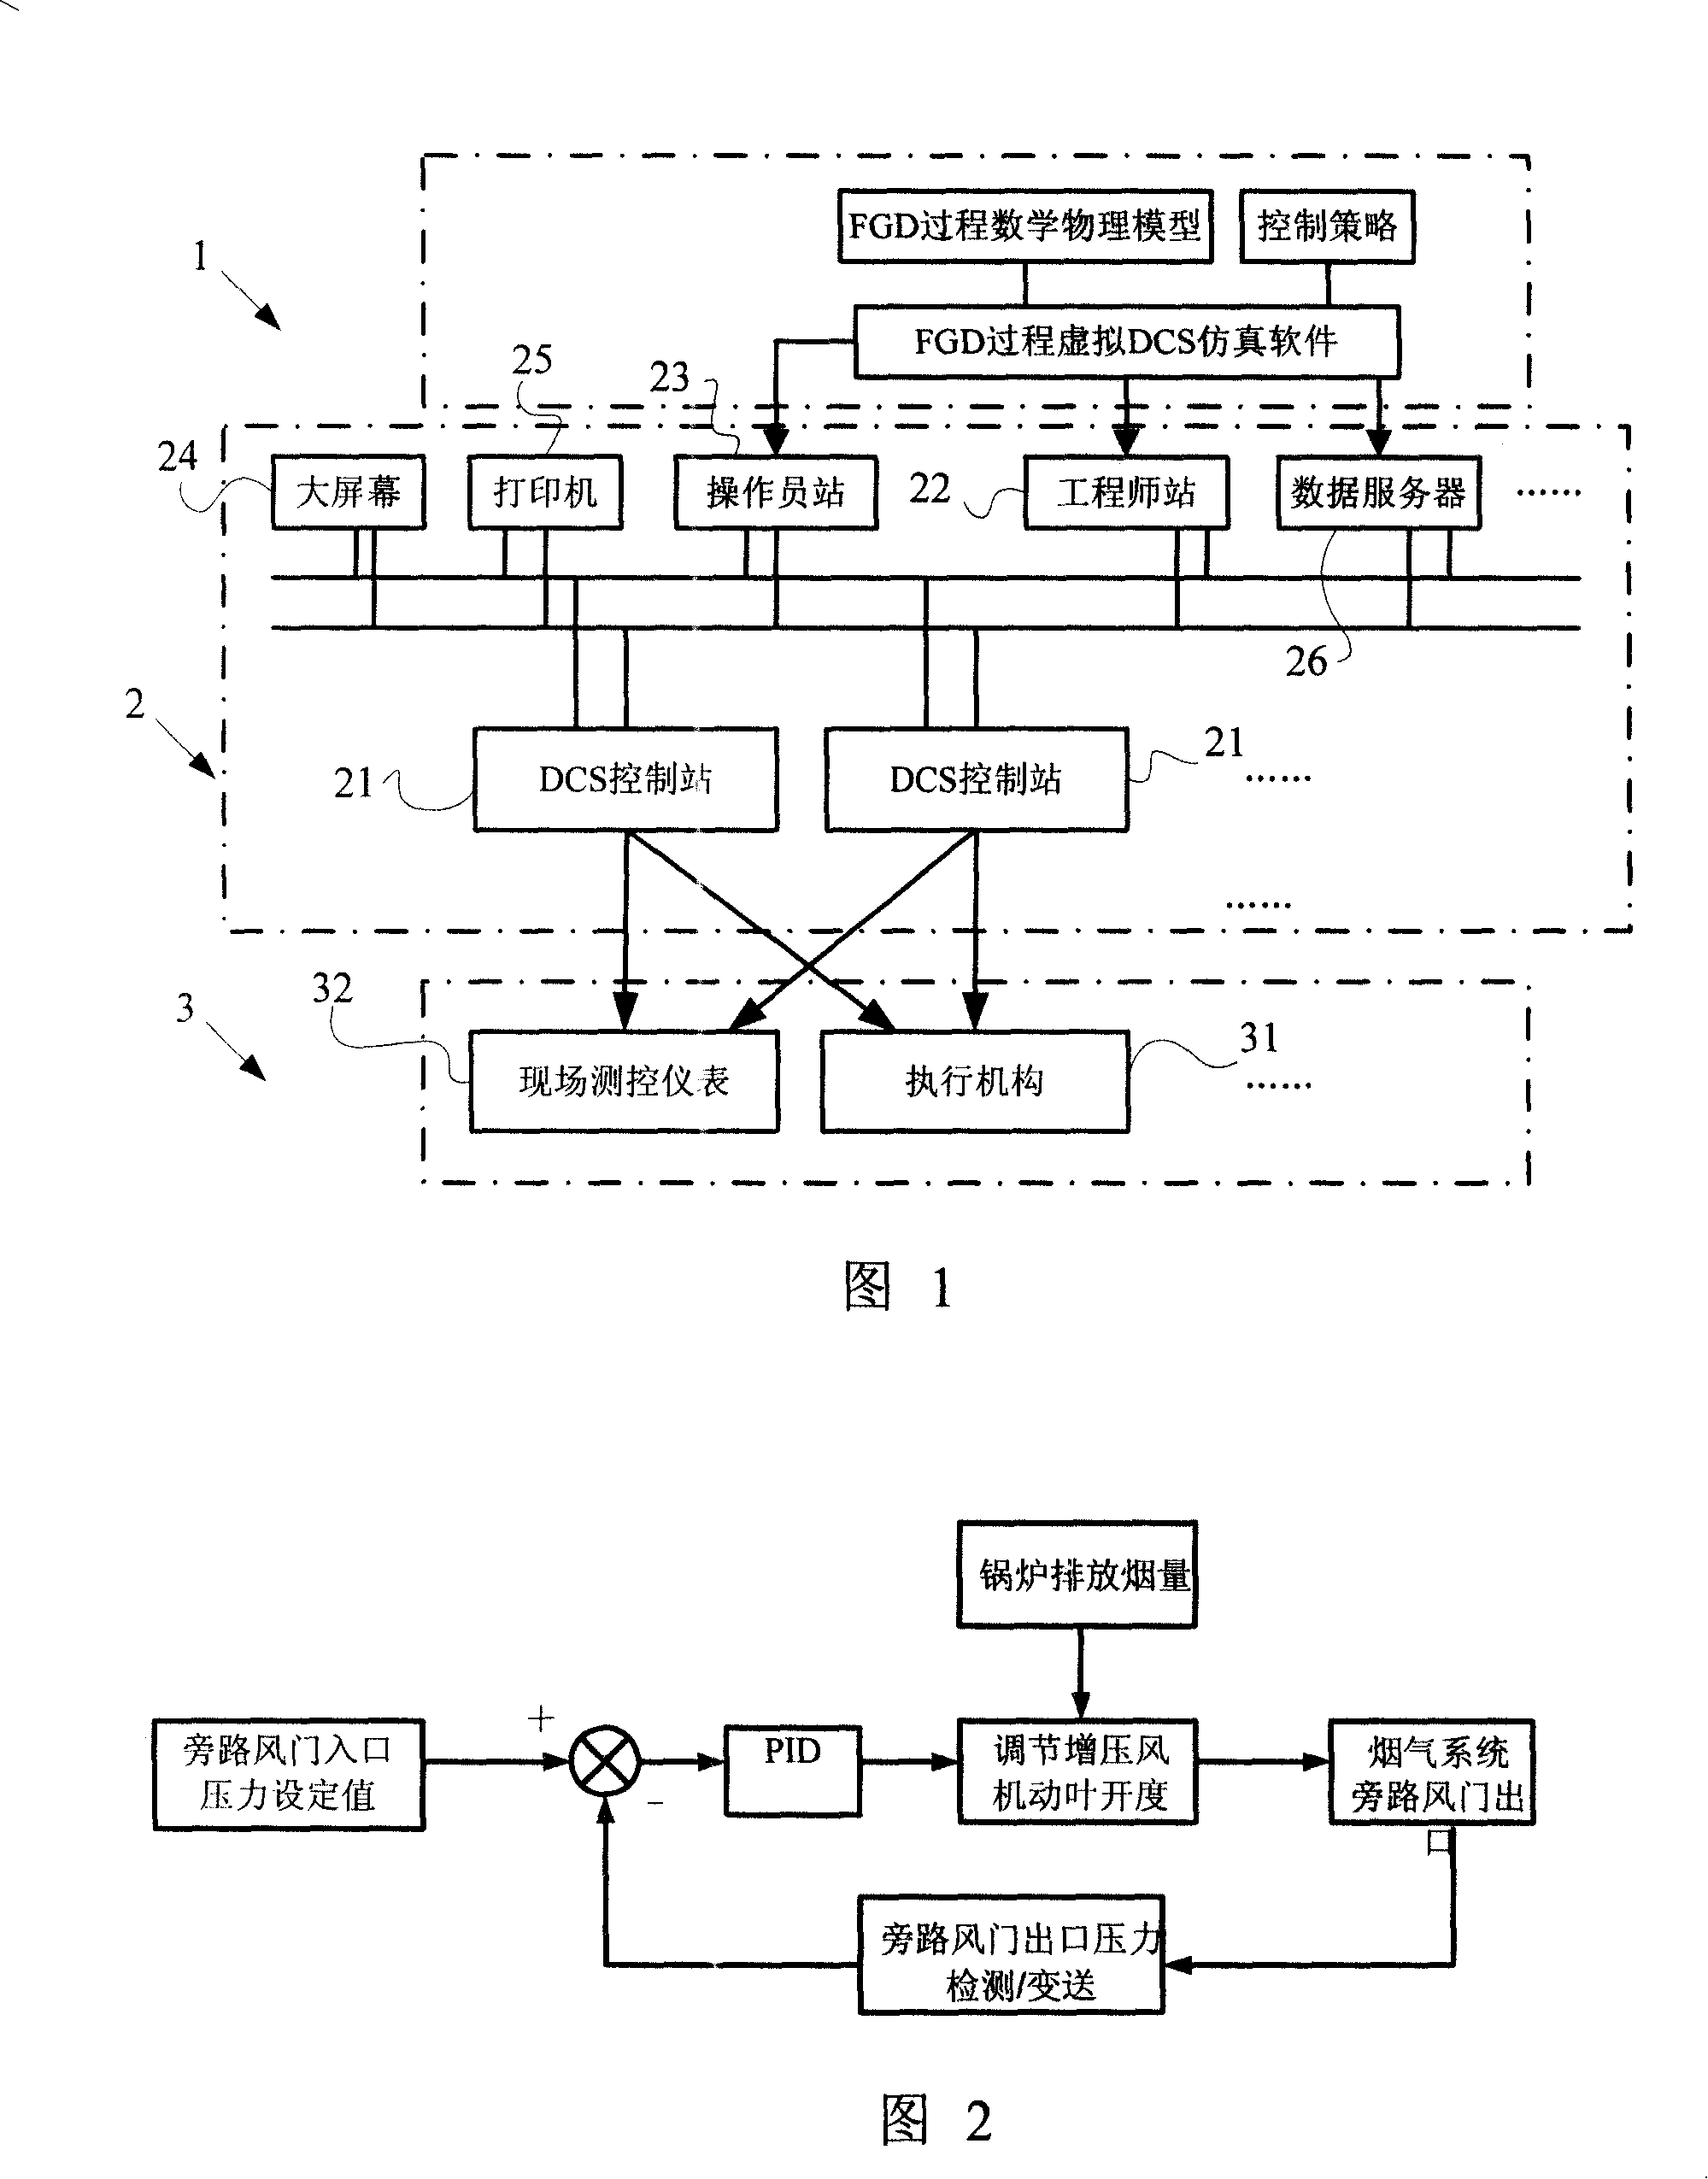 Flue gas desulfurization control system of large coal-fired power plant